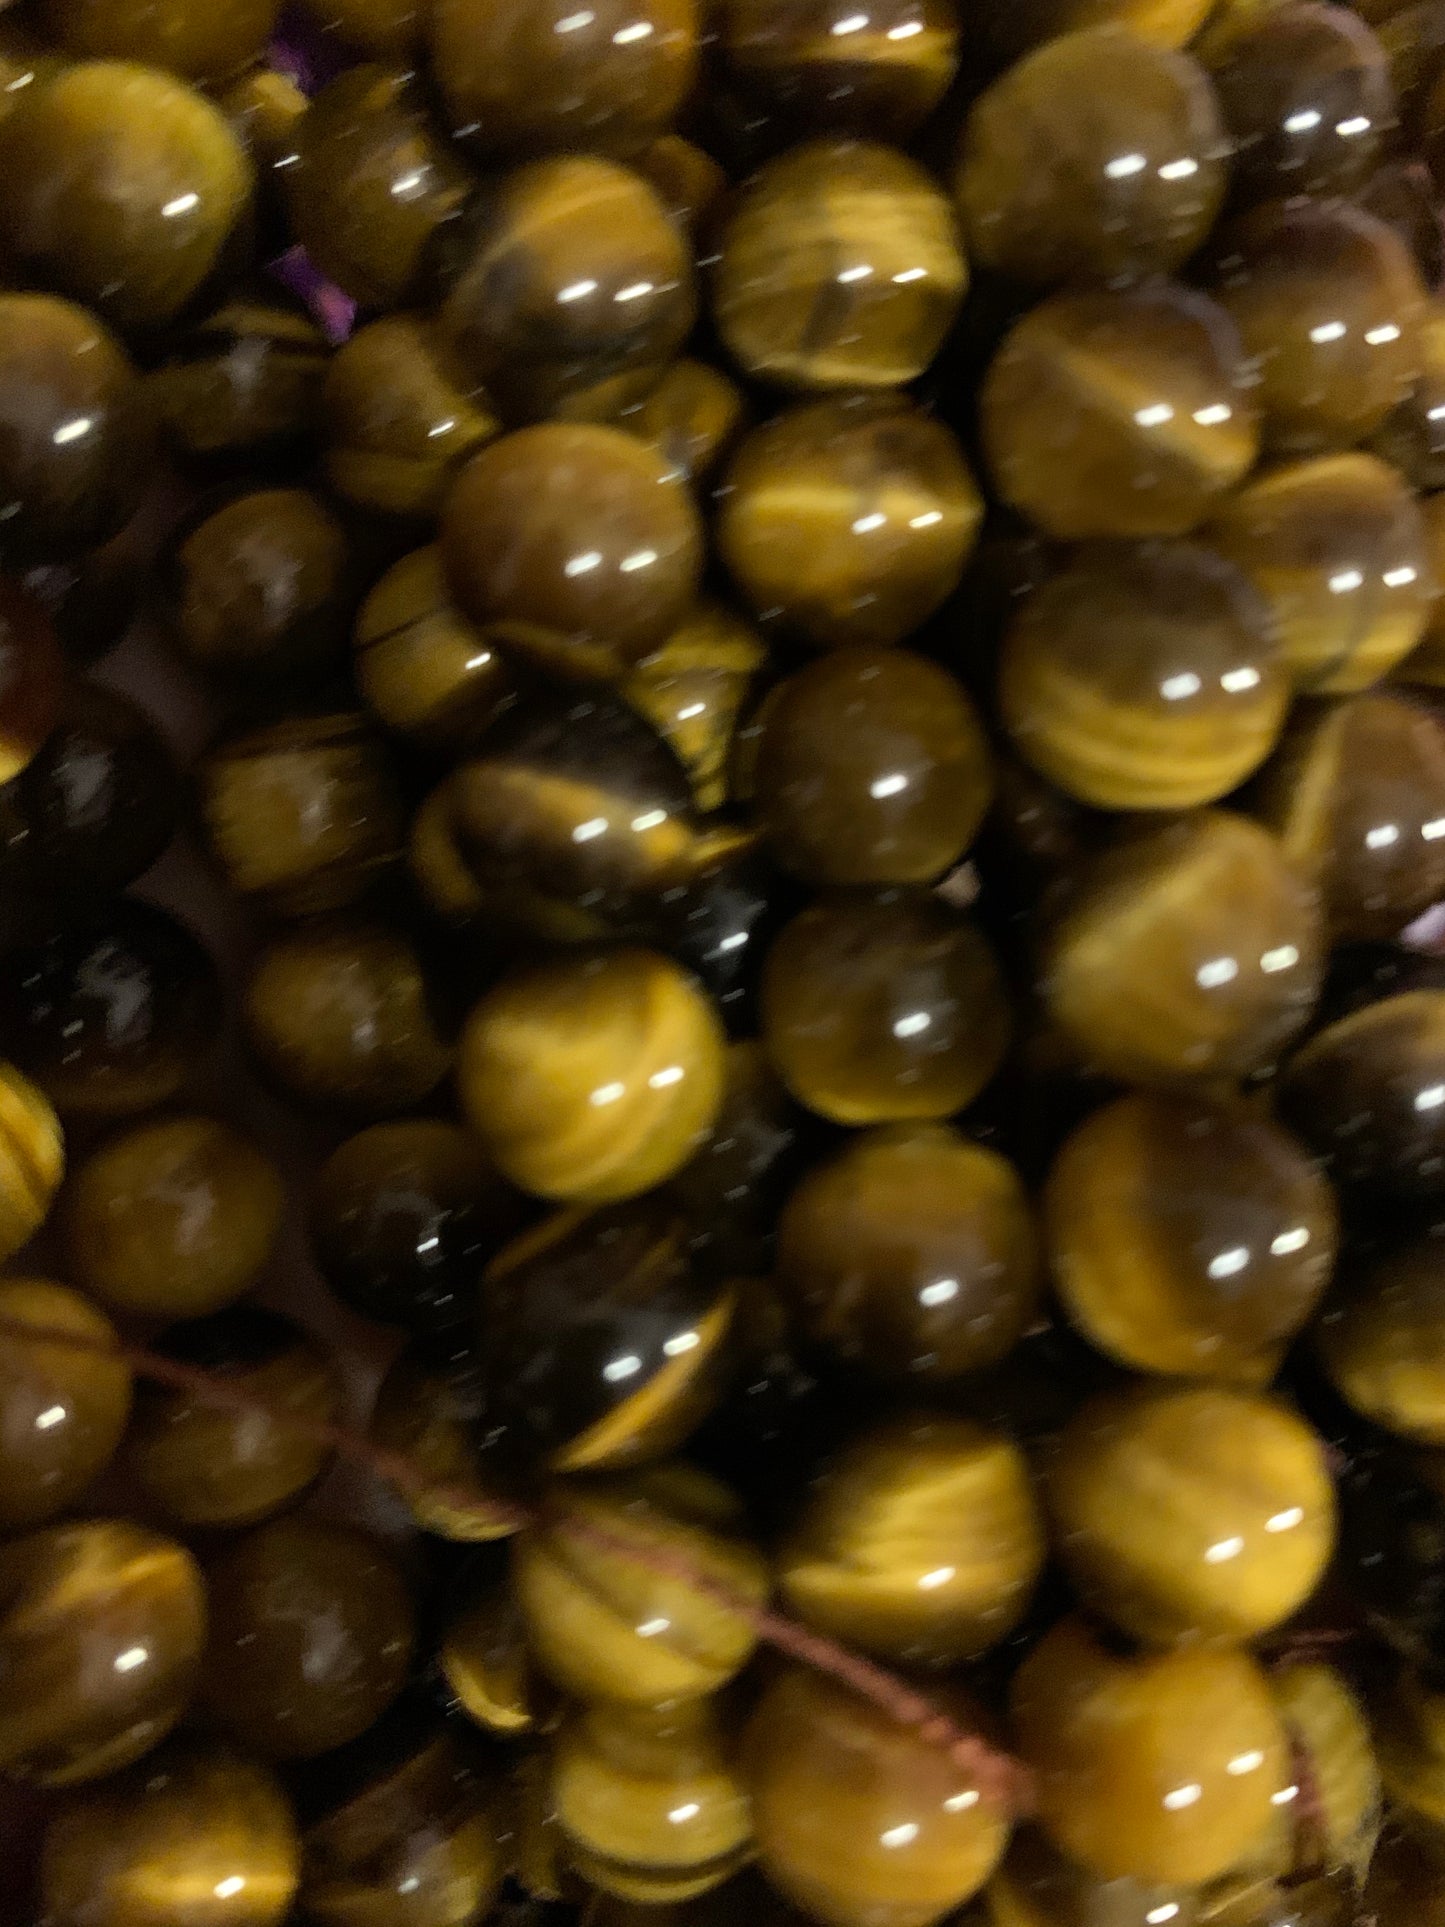 Tiger's Eye Bead/Stone (various colors and sizes)